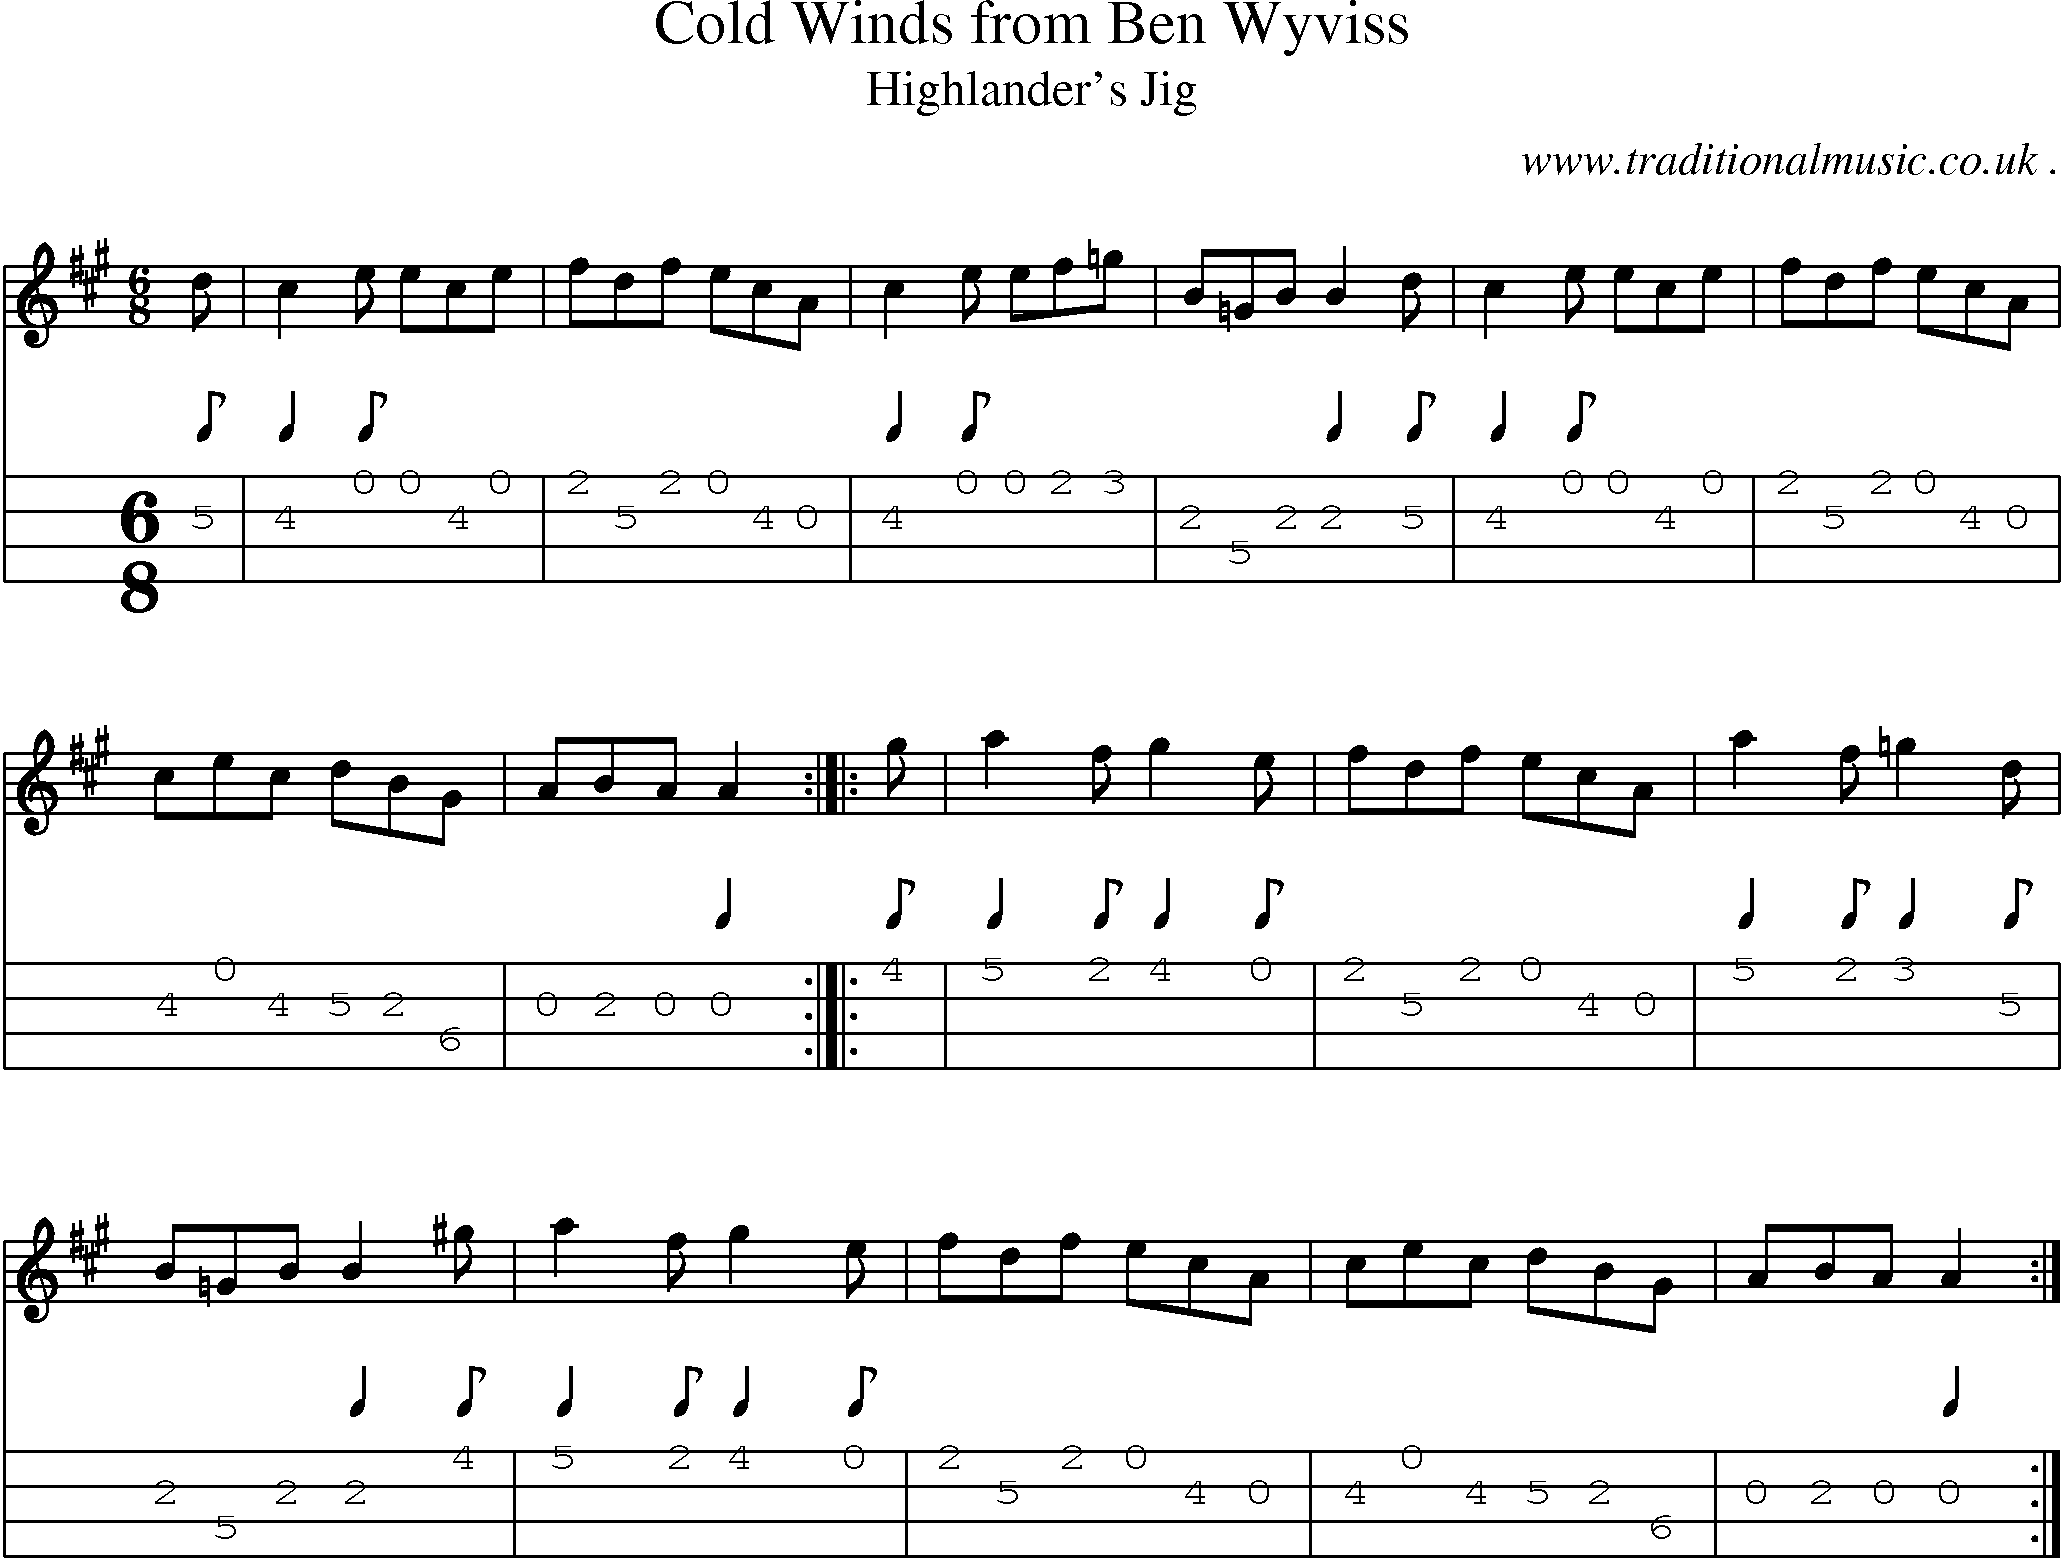 Sheet-music  score, Chords and Mandolin Tabs for Cold Winds From Ben Wyviss